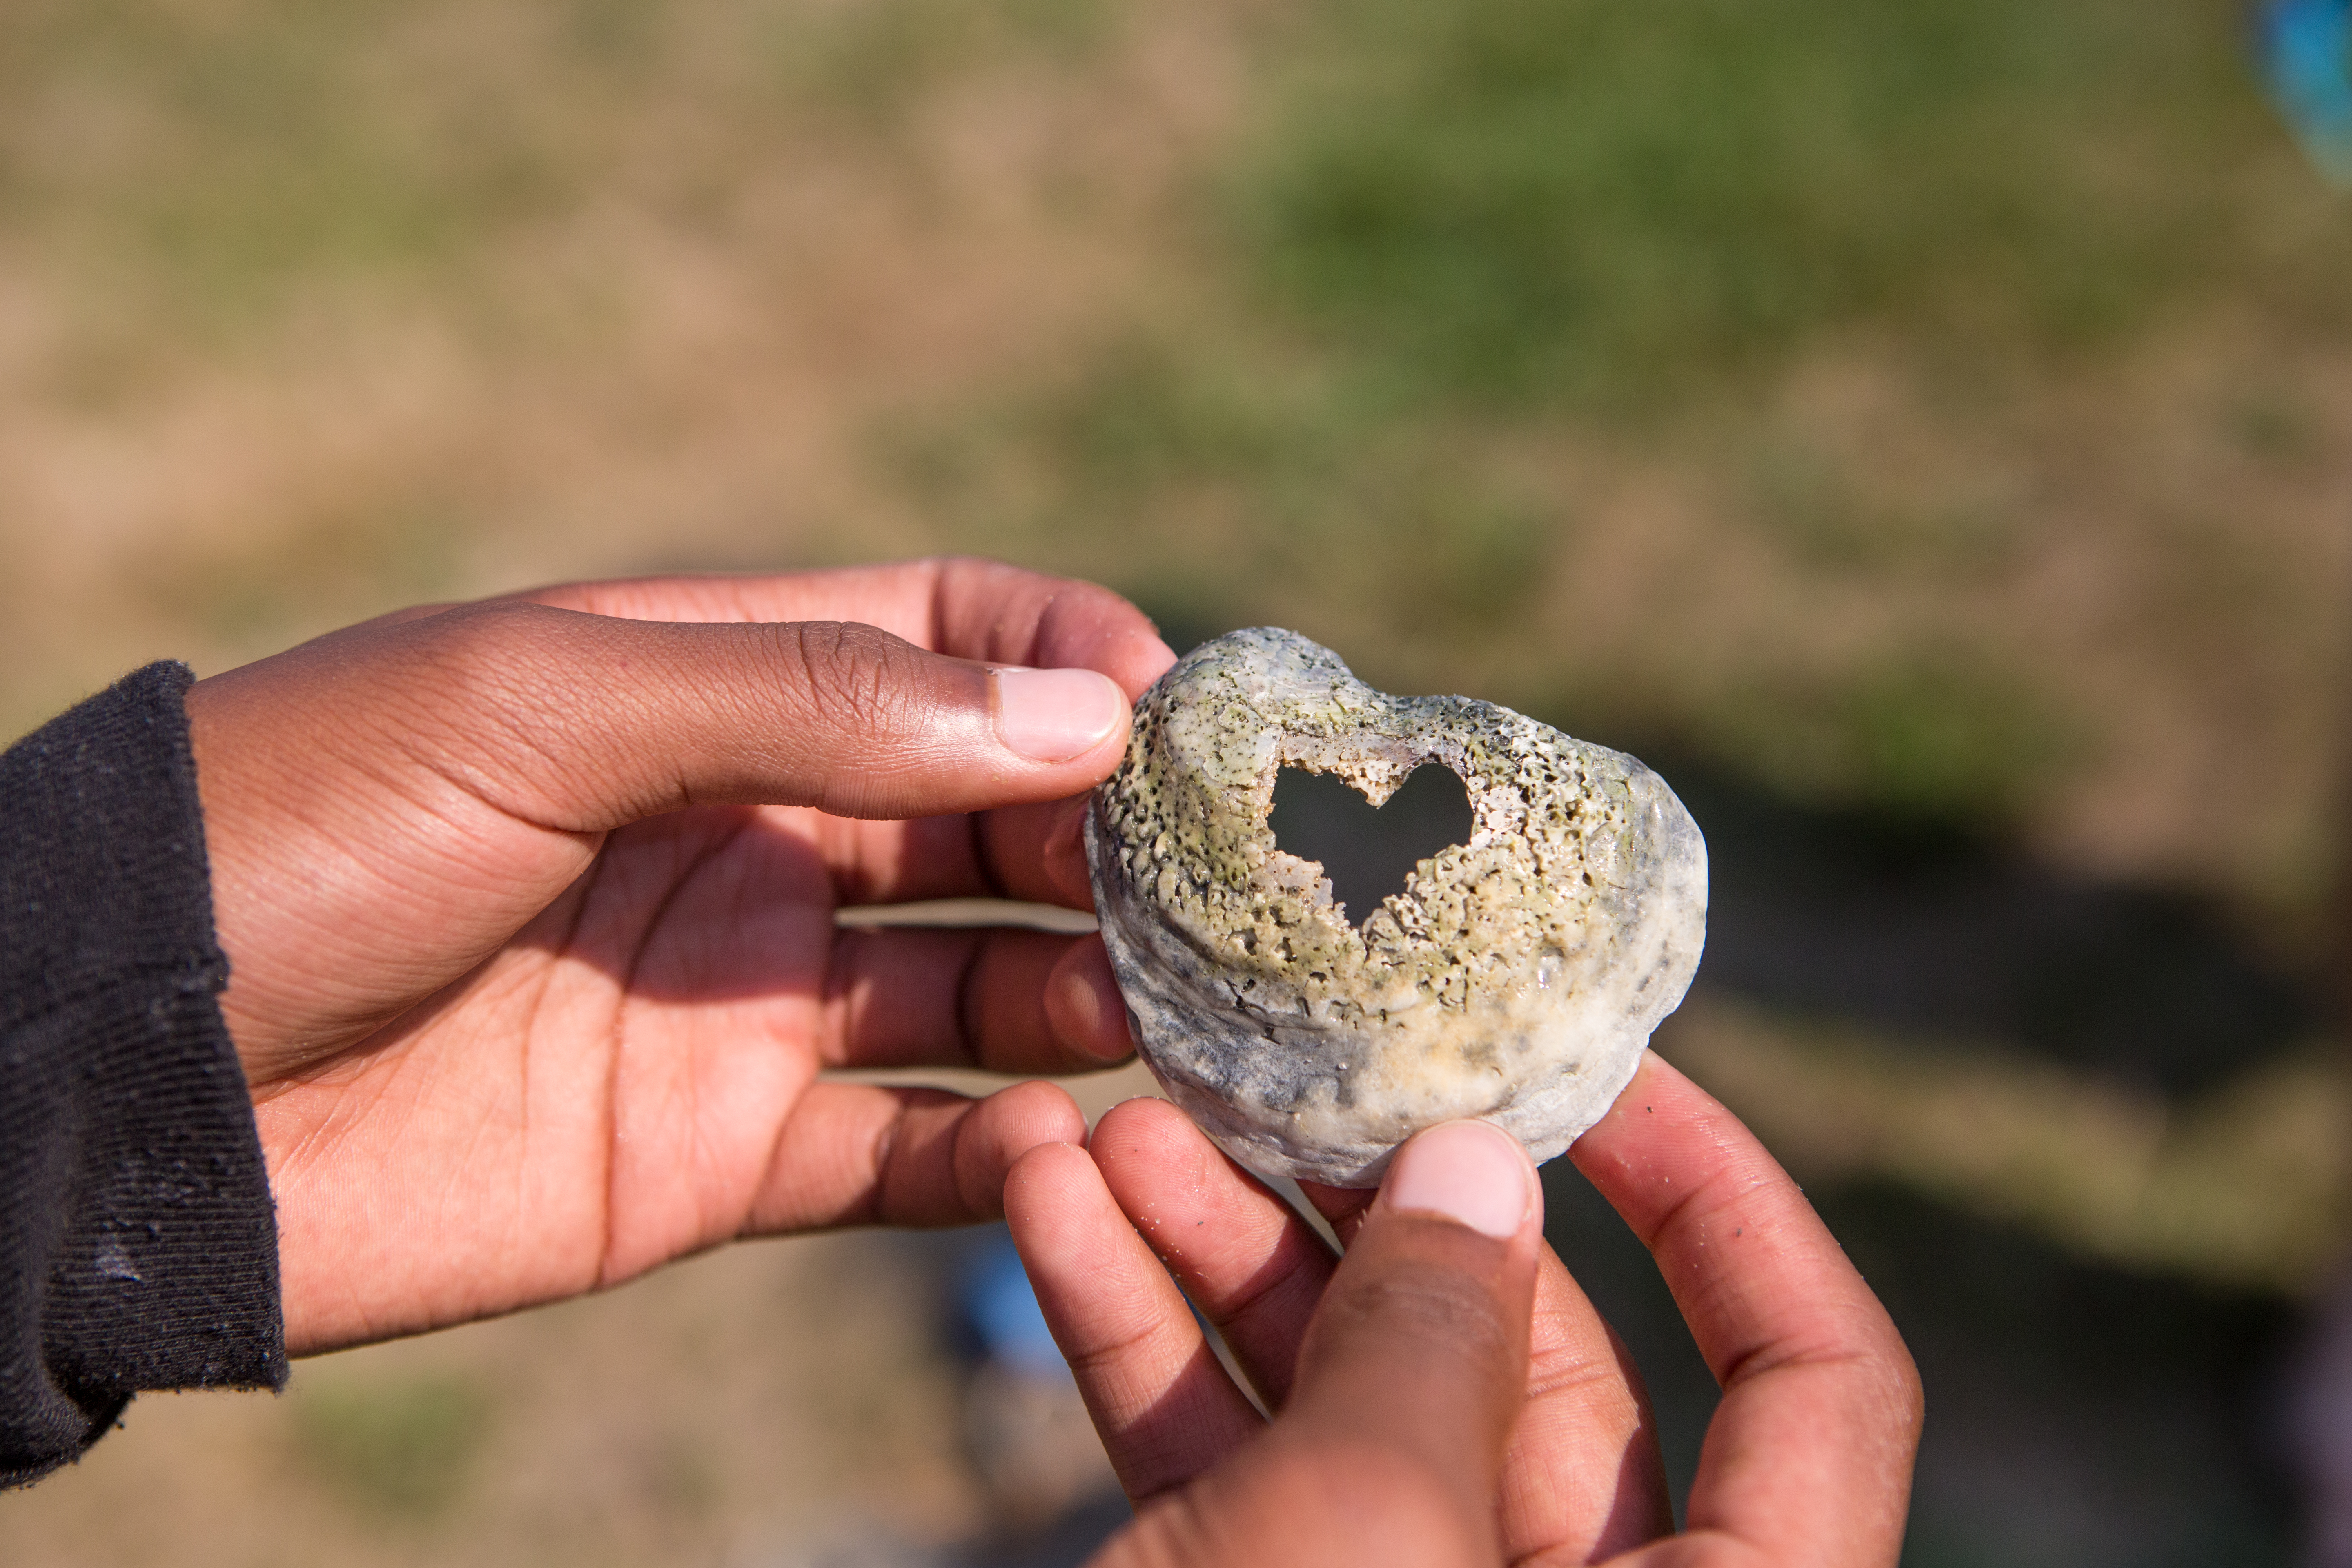 Hands holding a heart-shaped shell